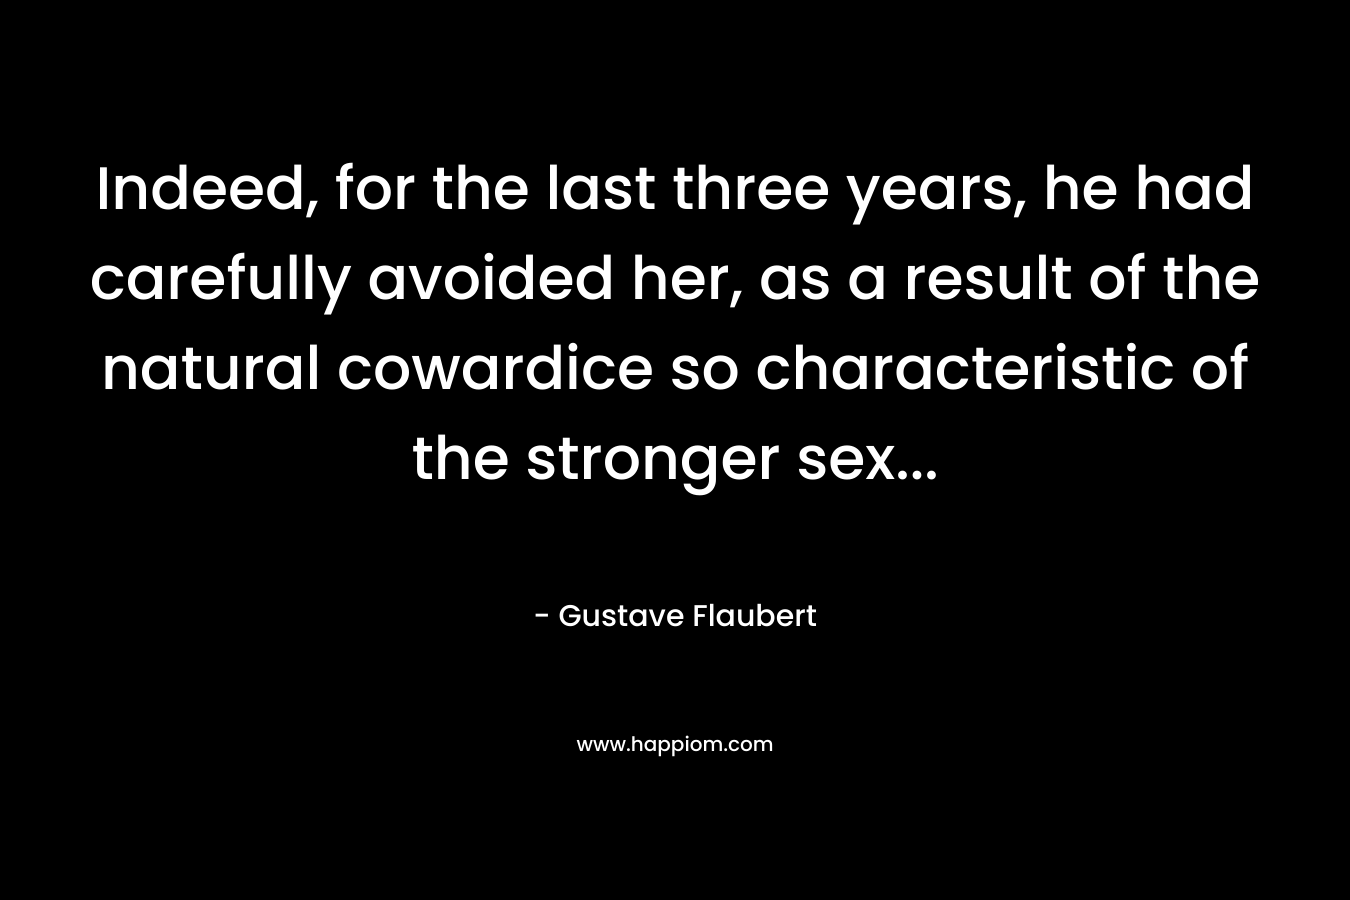 Indeed, for the last three years, he had carefully avoided her, as a result of the natural cowardice so characteristic of the stronger sex...